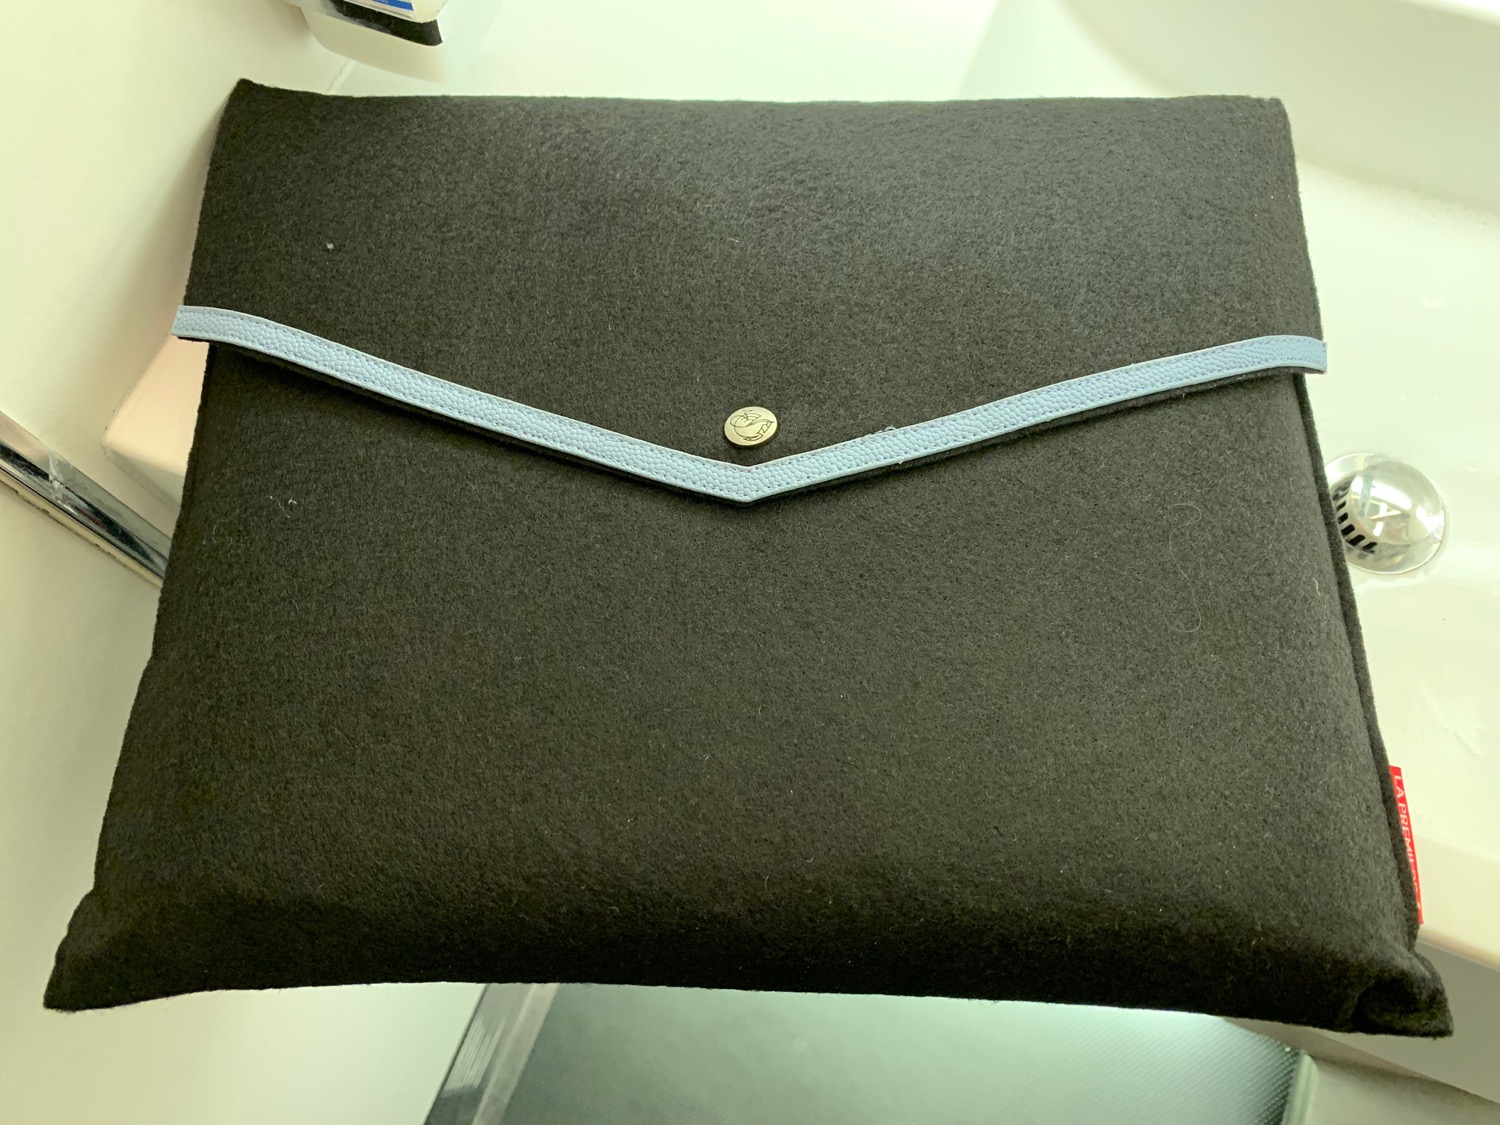 a black bag with a blue strap